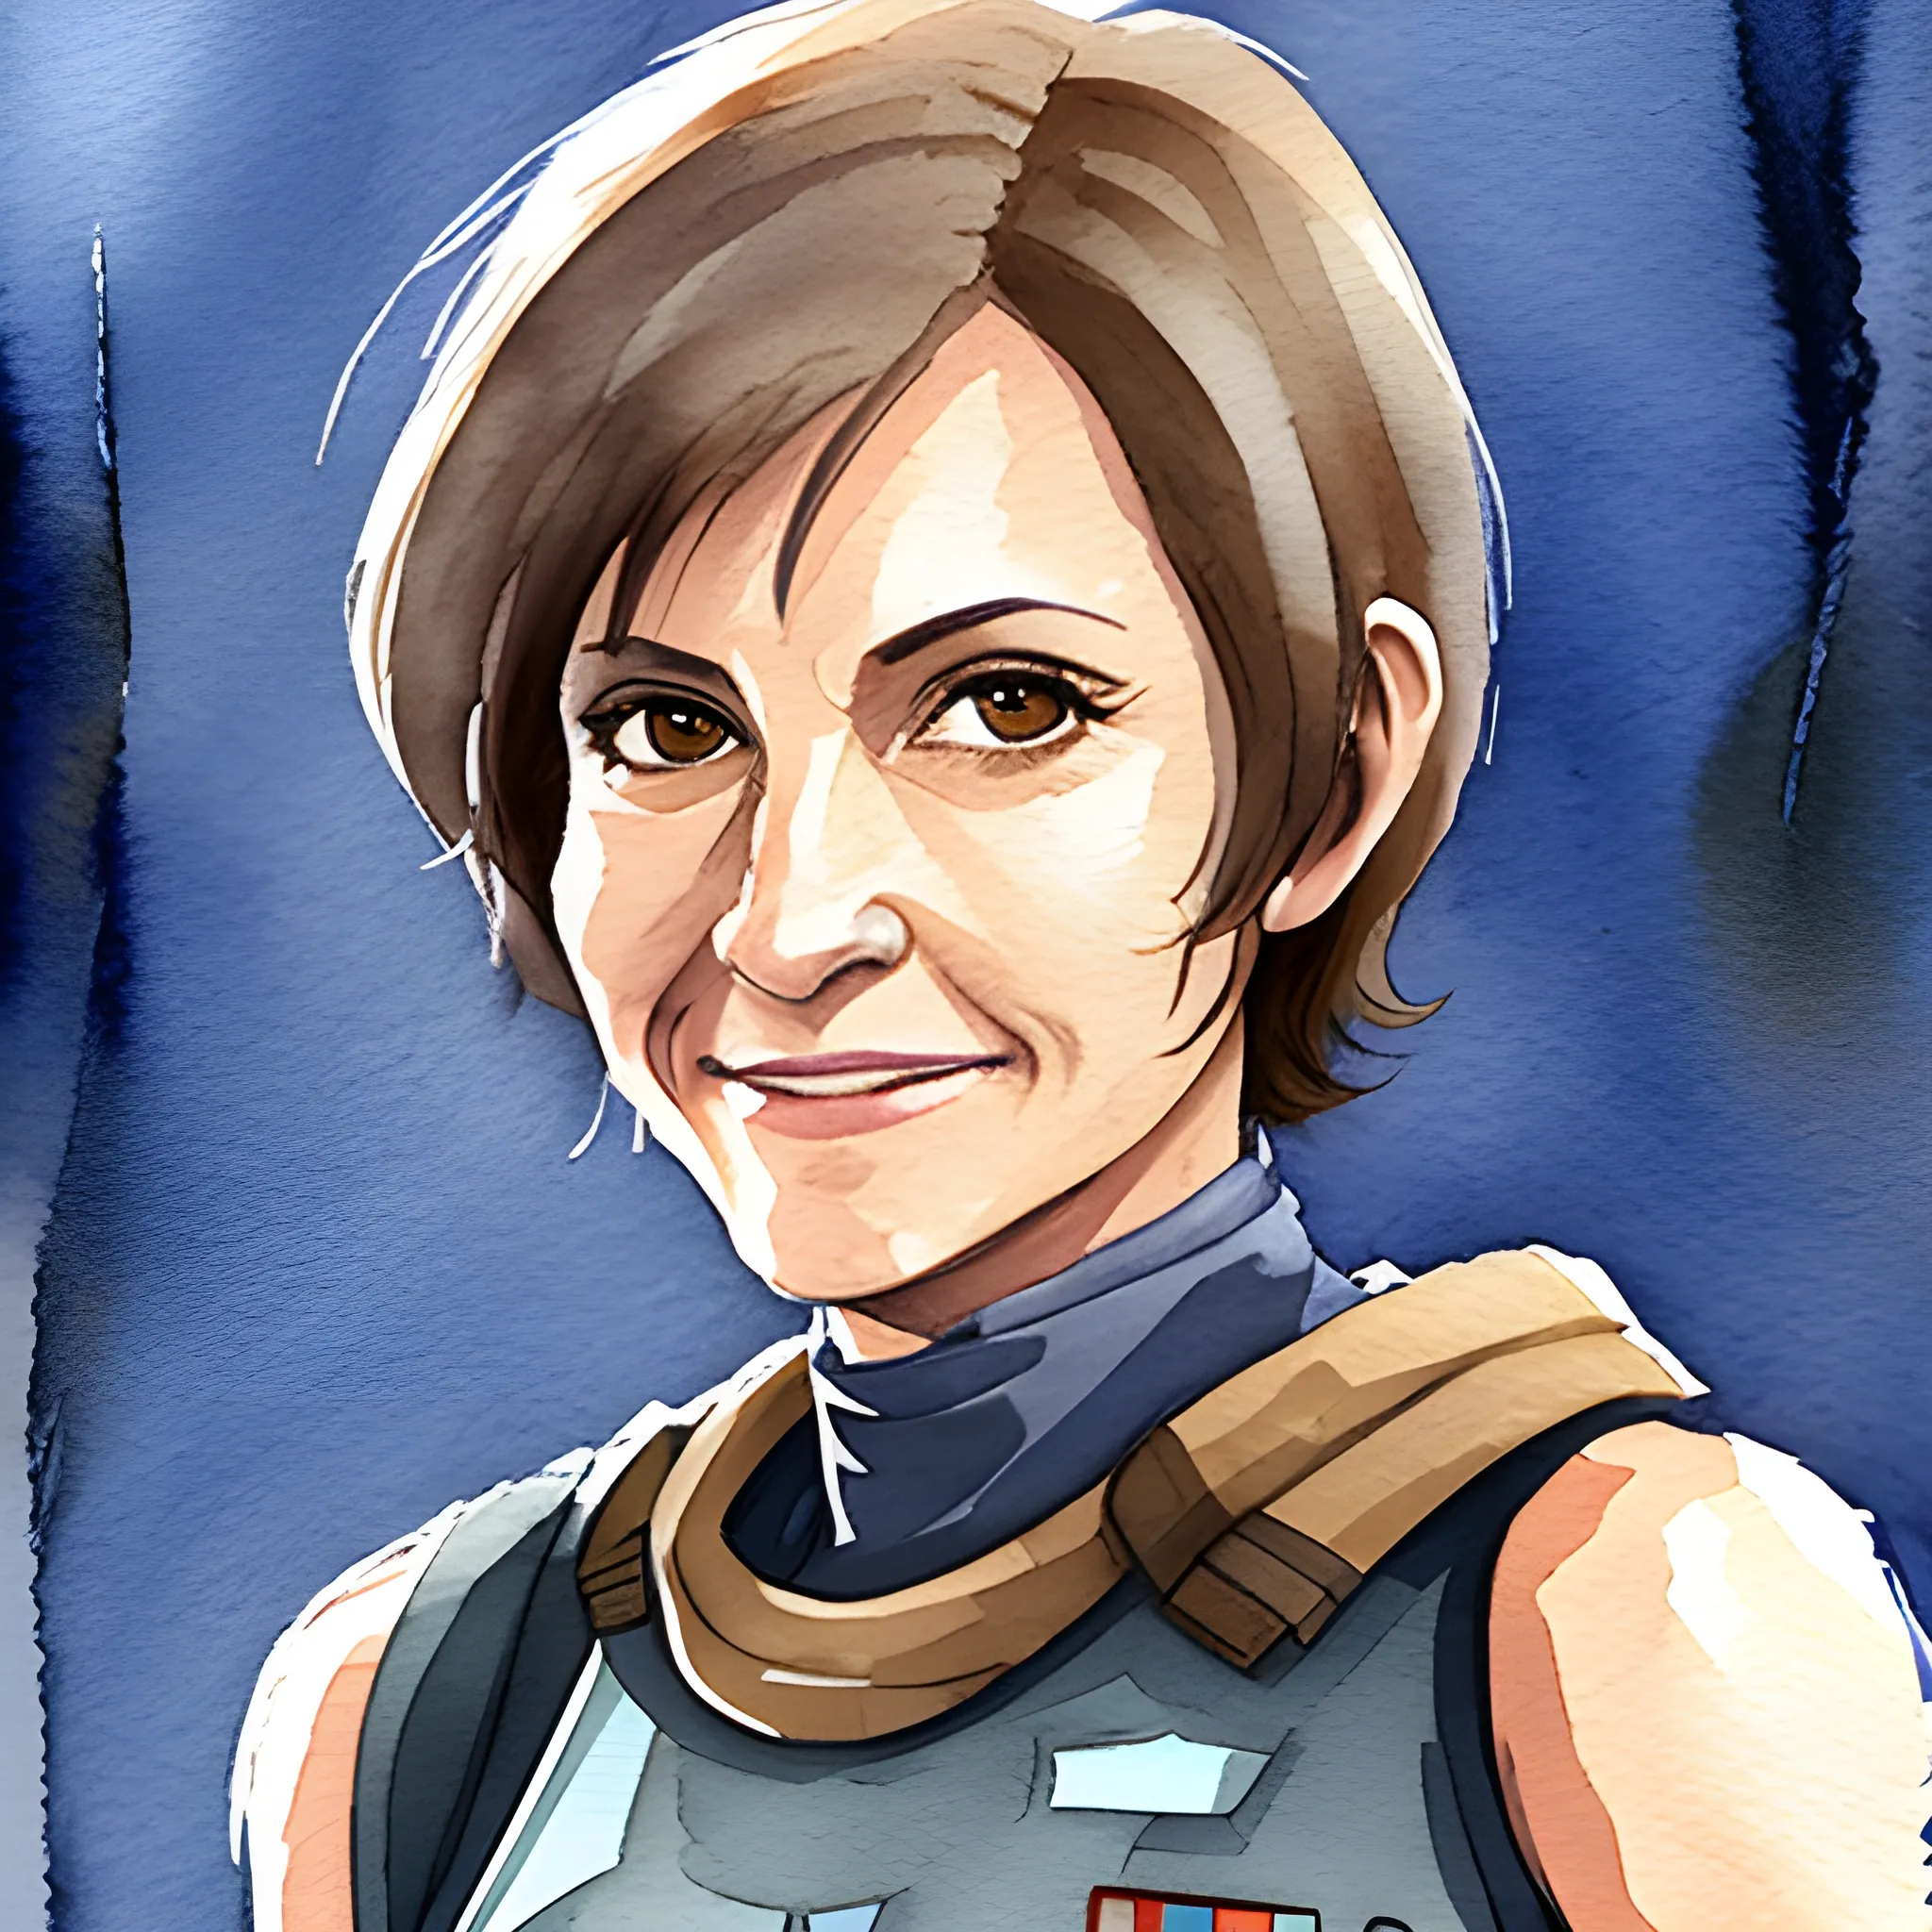 star wars, female, 40 years old, jedi, short hair, dark hair, almond eyes, athletic, grinning, relaxed, Water Color